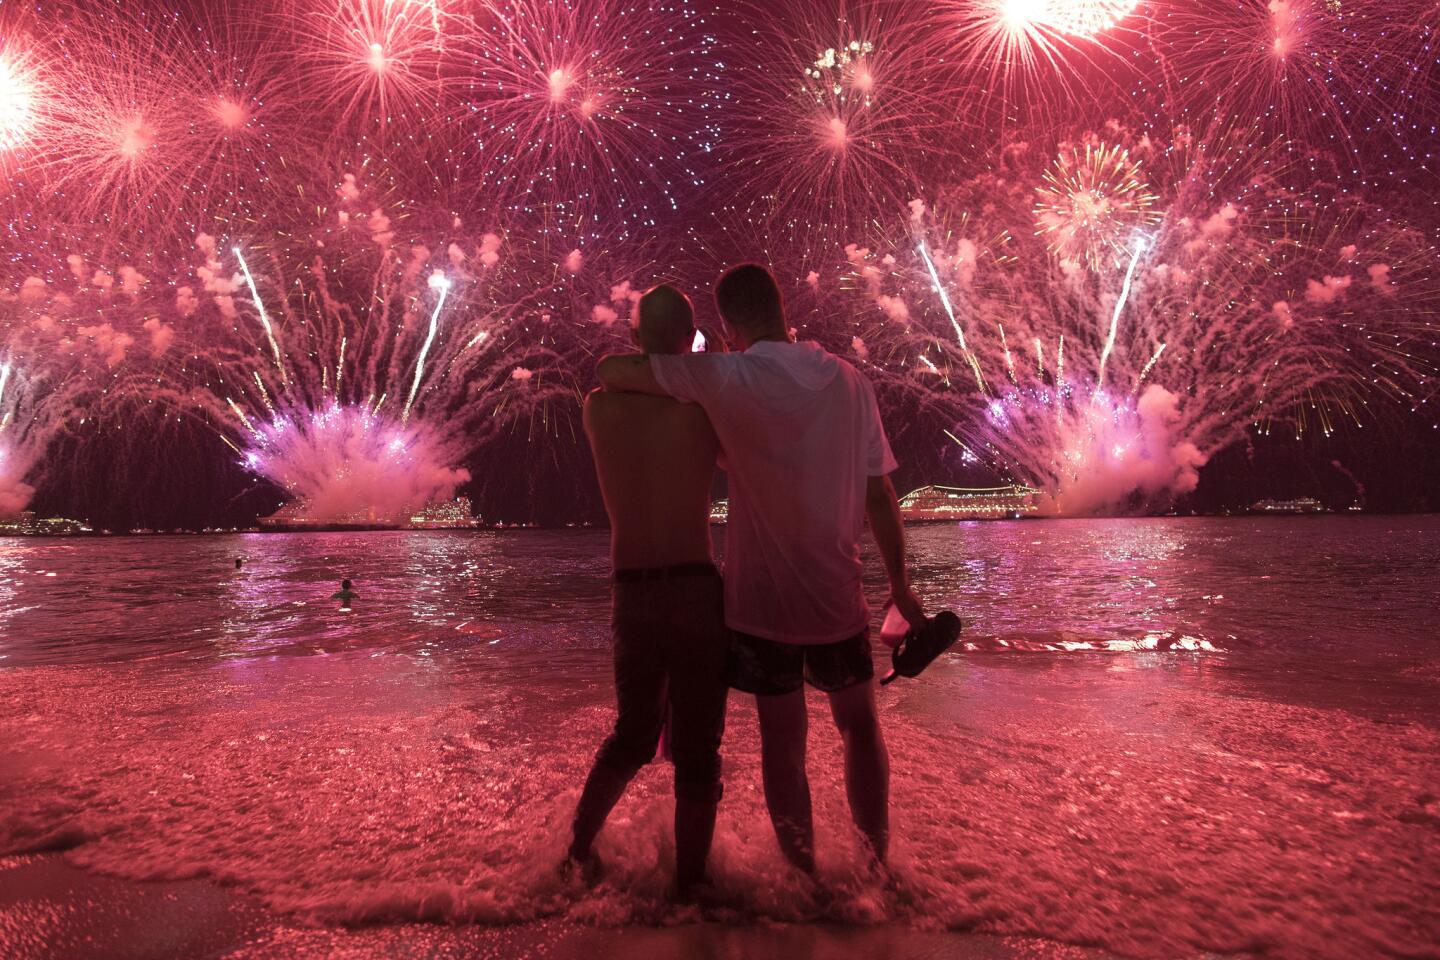 Fireworks explode over Copacabana Beach just after midnight during the New Year's celebrations in Rio de Janeiro.